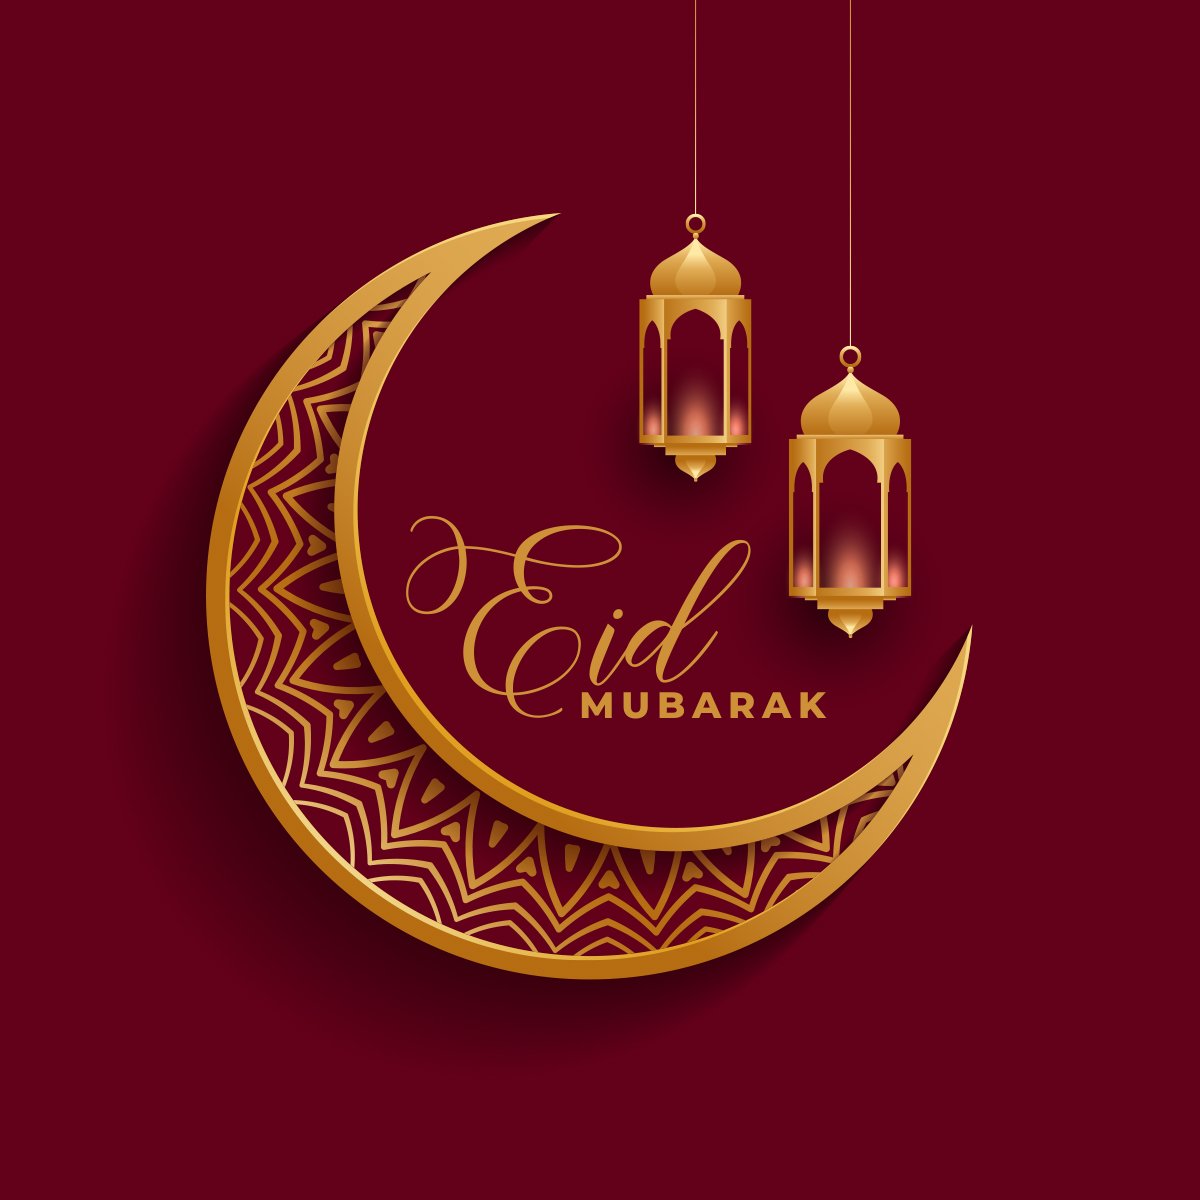 Eid Mubarak! Wishing you and your loved ones a blessed and joyous Eid filled with love, happiness, and prosperity. ☪️